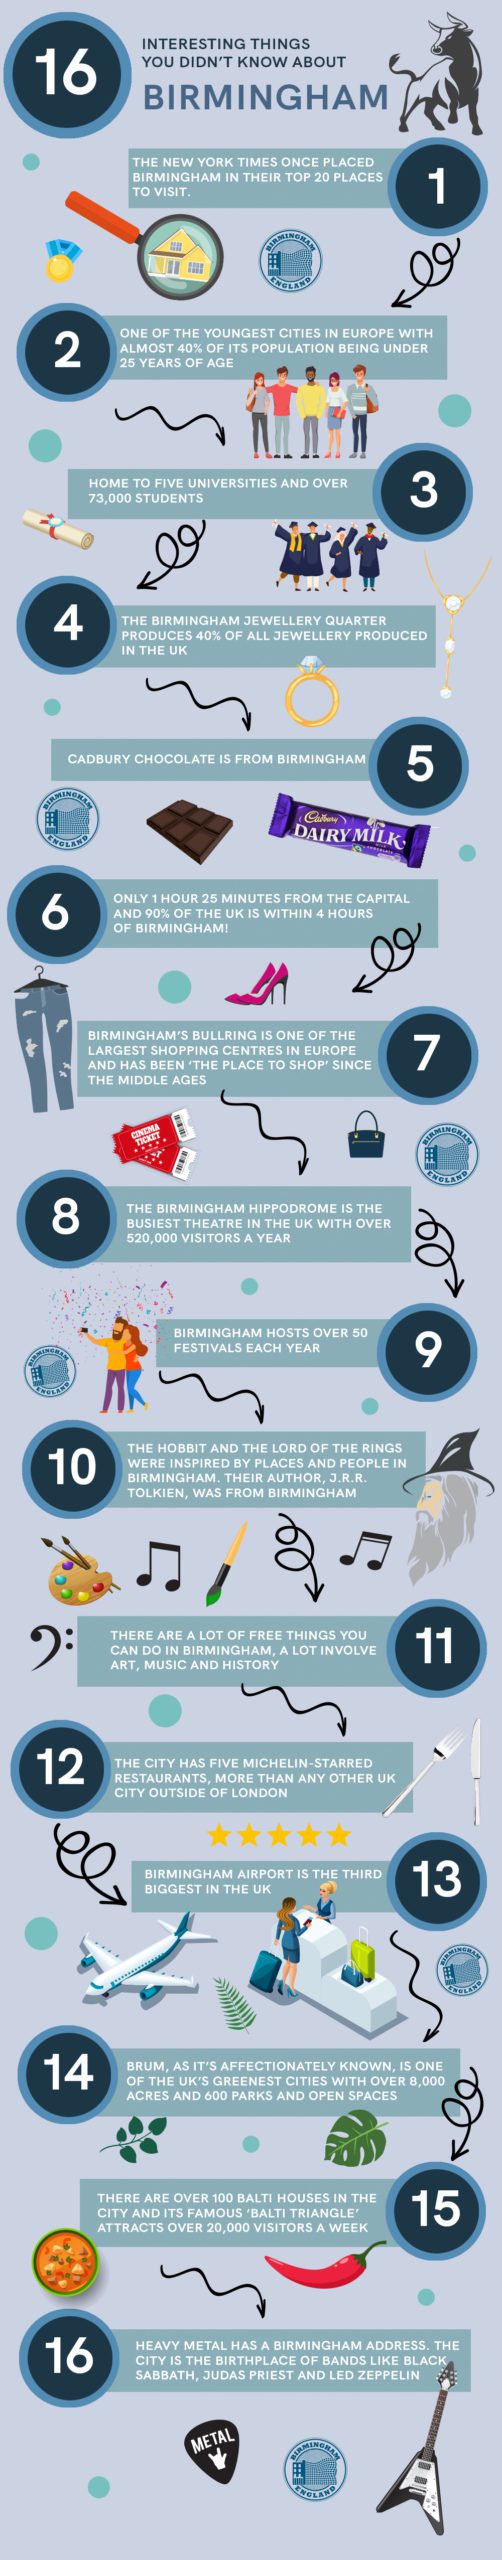 16 Interesting Things You Didn’t Know About Birmingham infographic